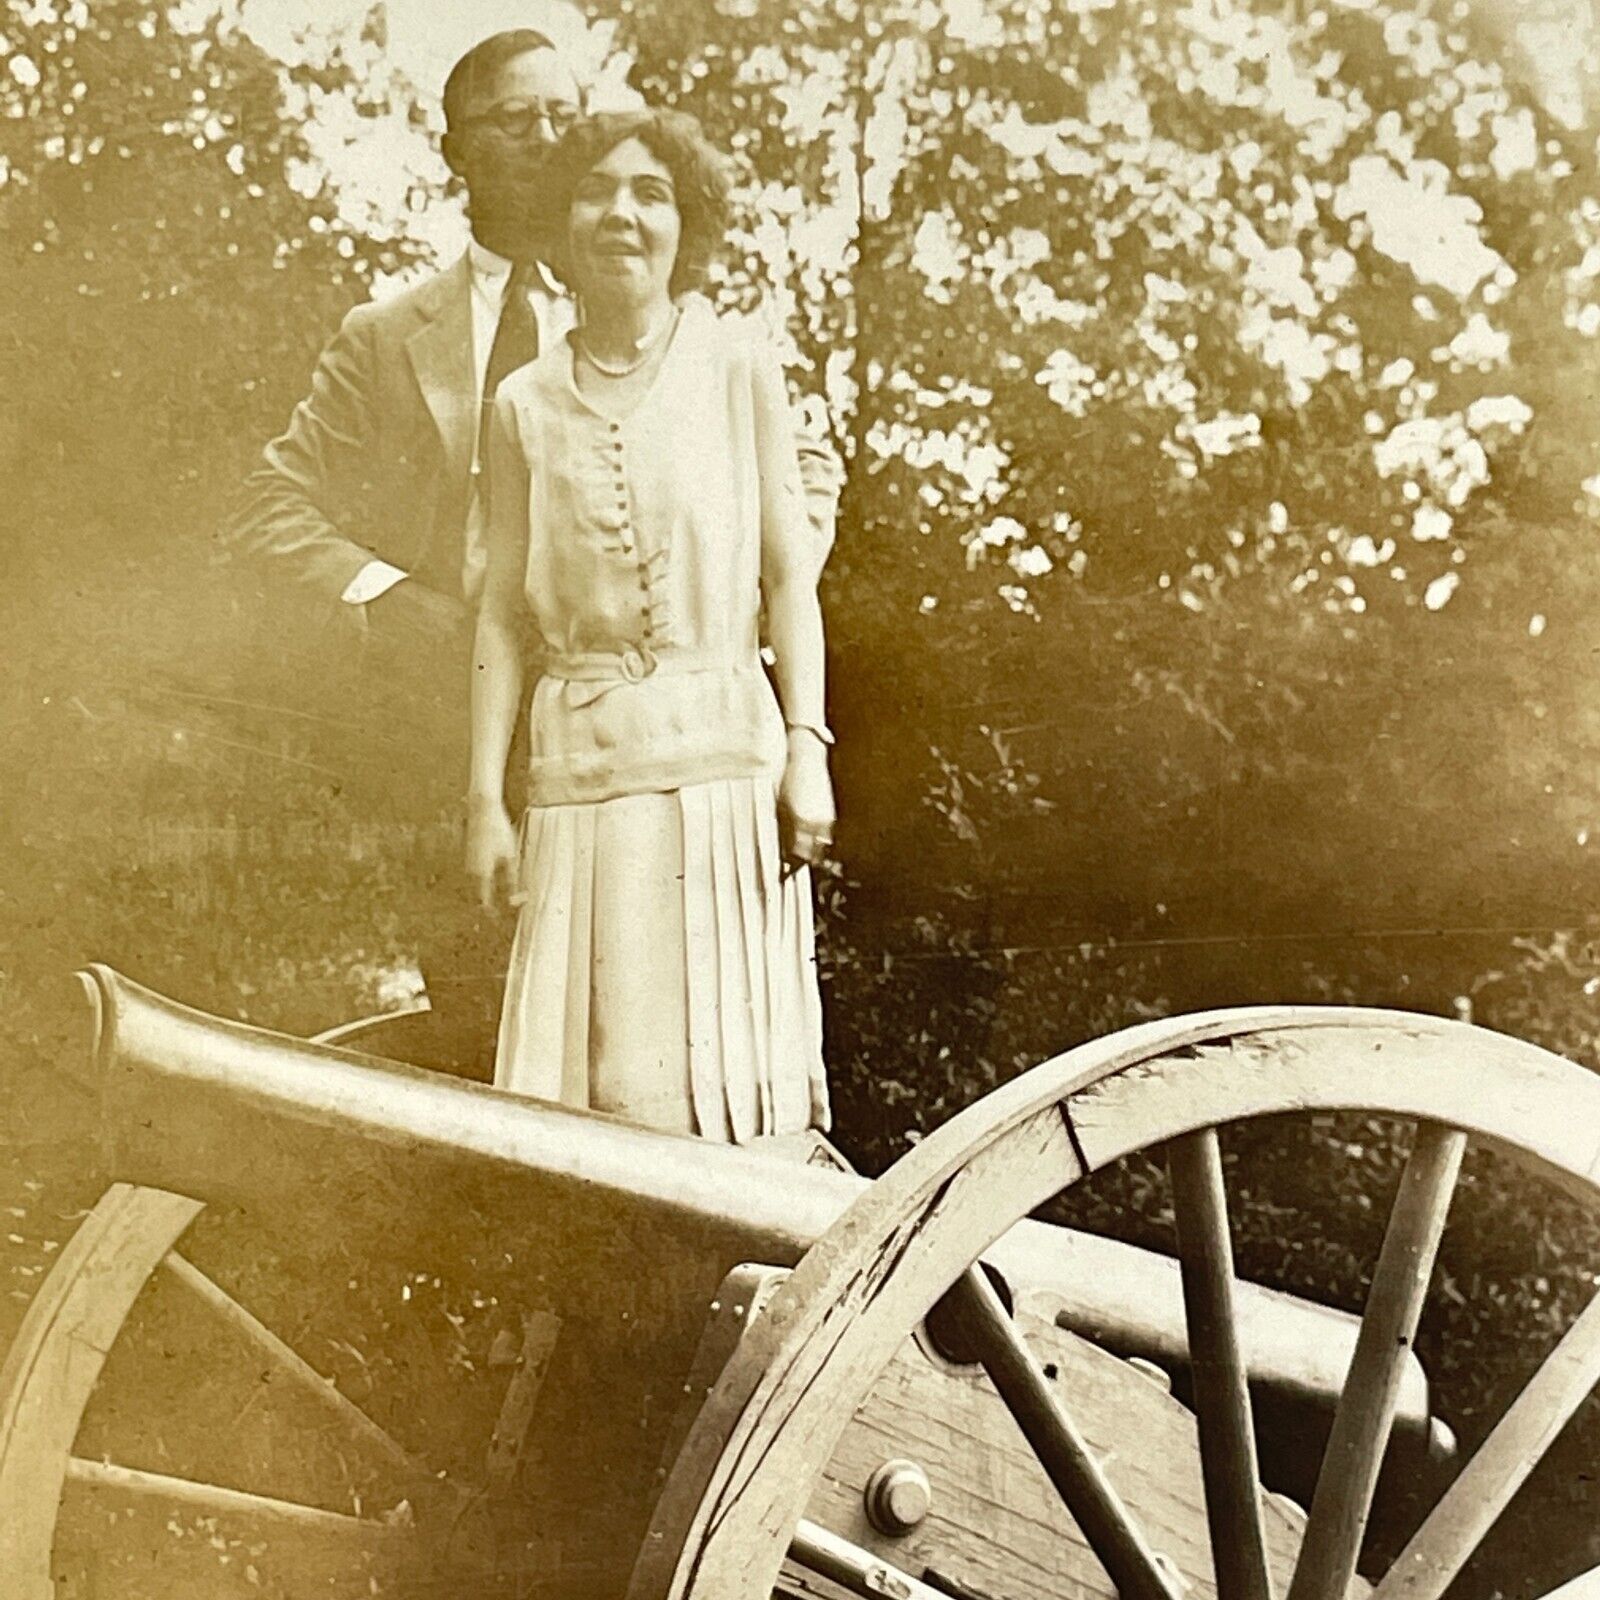 OH Photograph 1920-30's Cute Couple Posing Near Large Cannon Wheel 